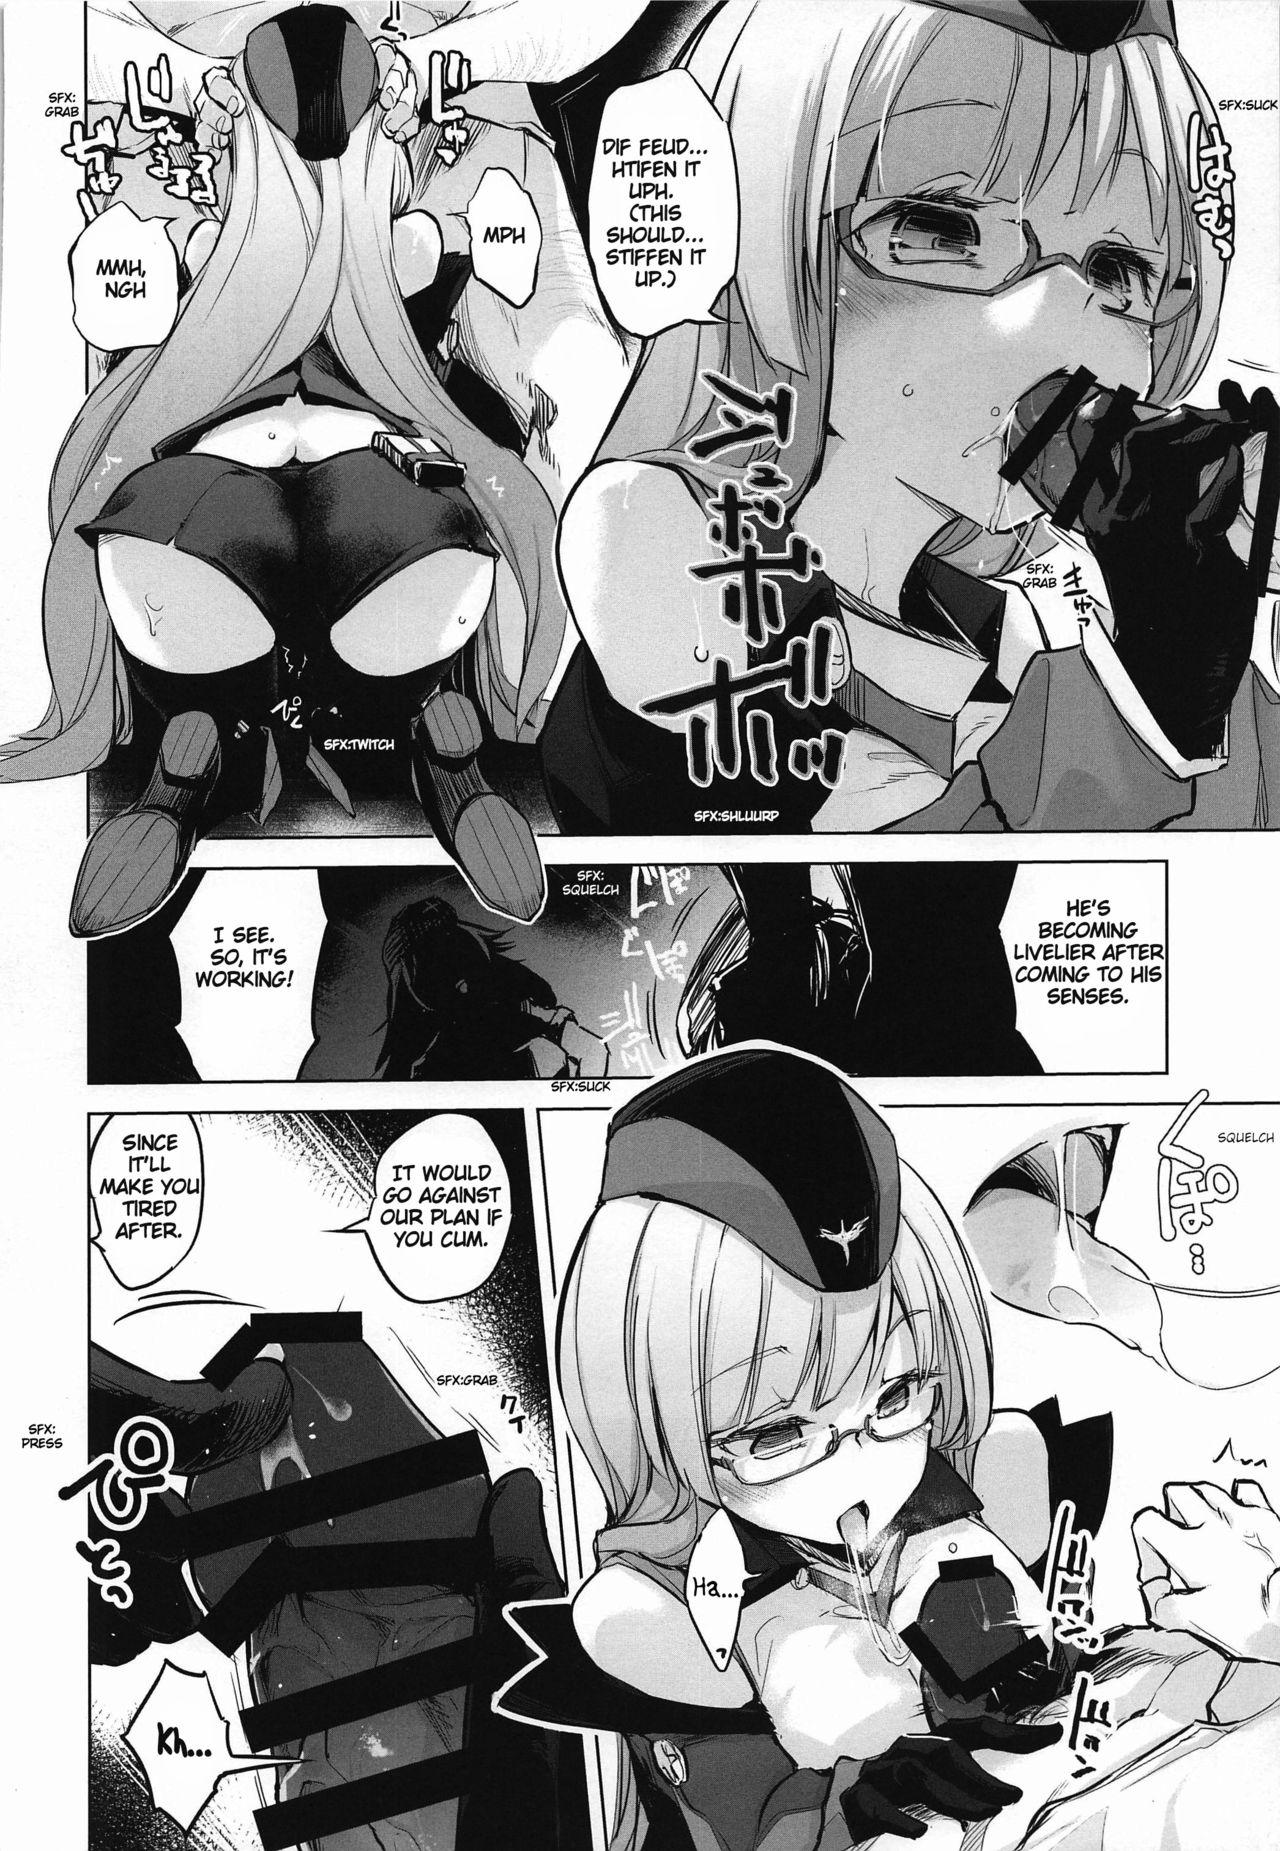 Hand Insufficient main force to shoot ! Iron-Blood Battleship and Battle Cruiser Summary Book - Azur lane French Porn - Page 5